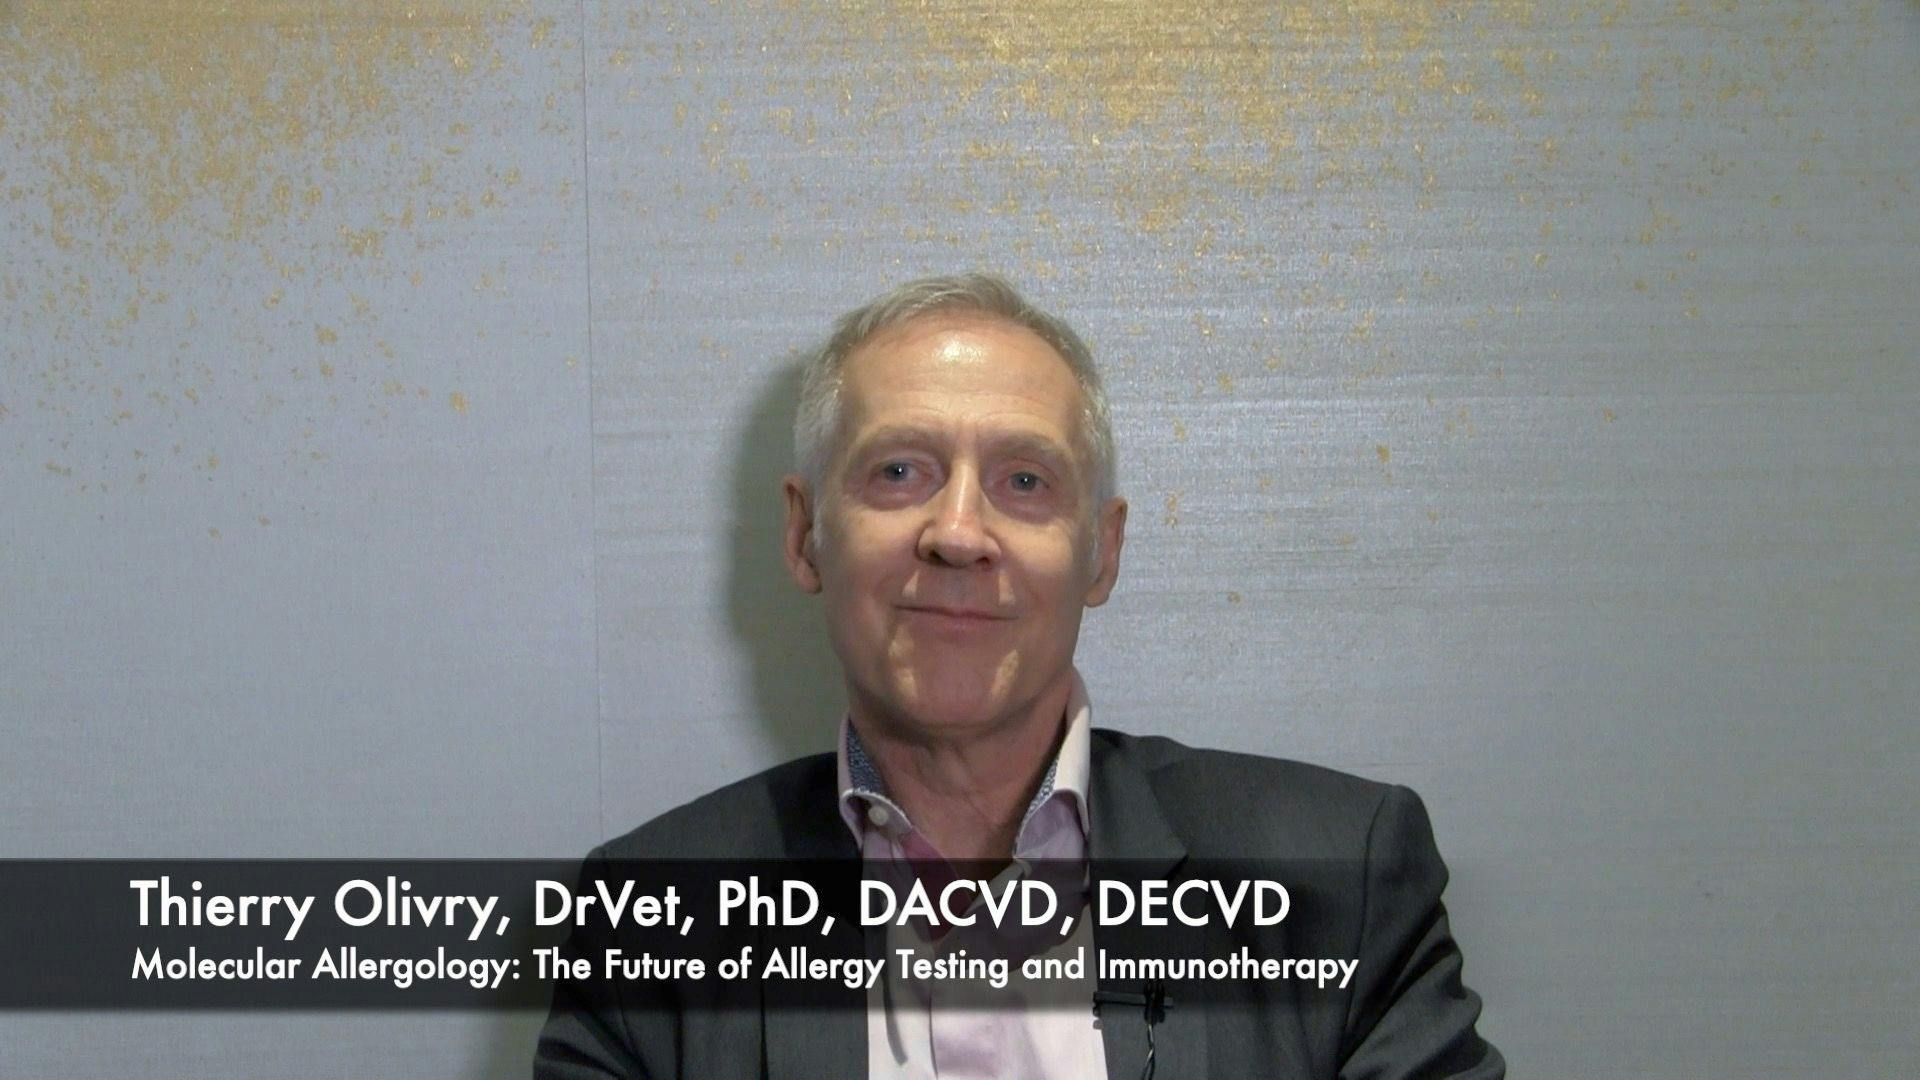 Molecular allergology: what you need to know about the future of allergy testing